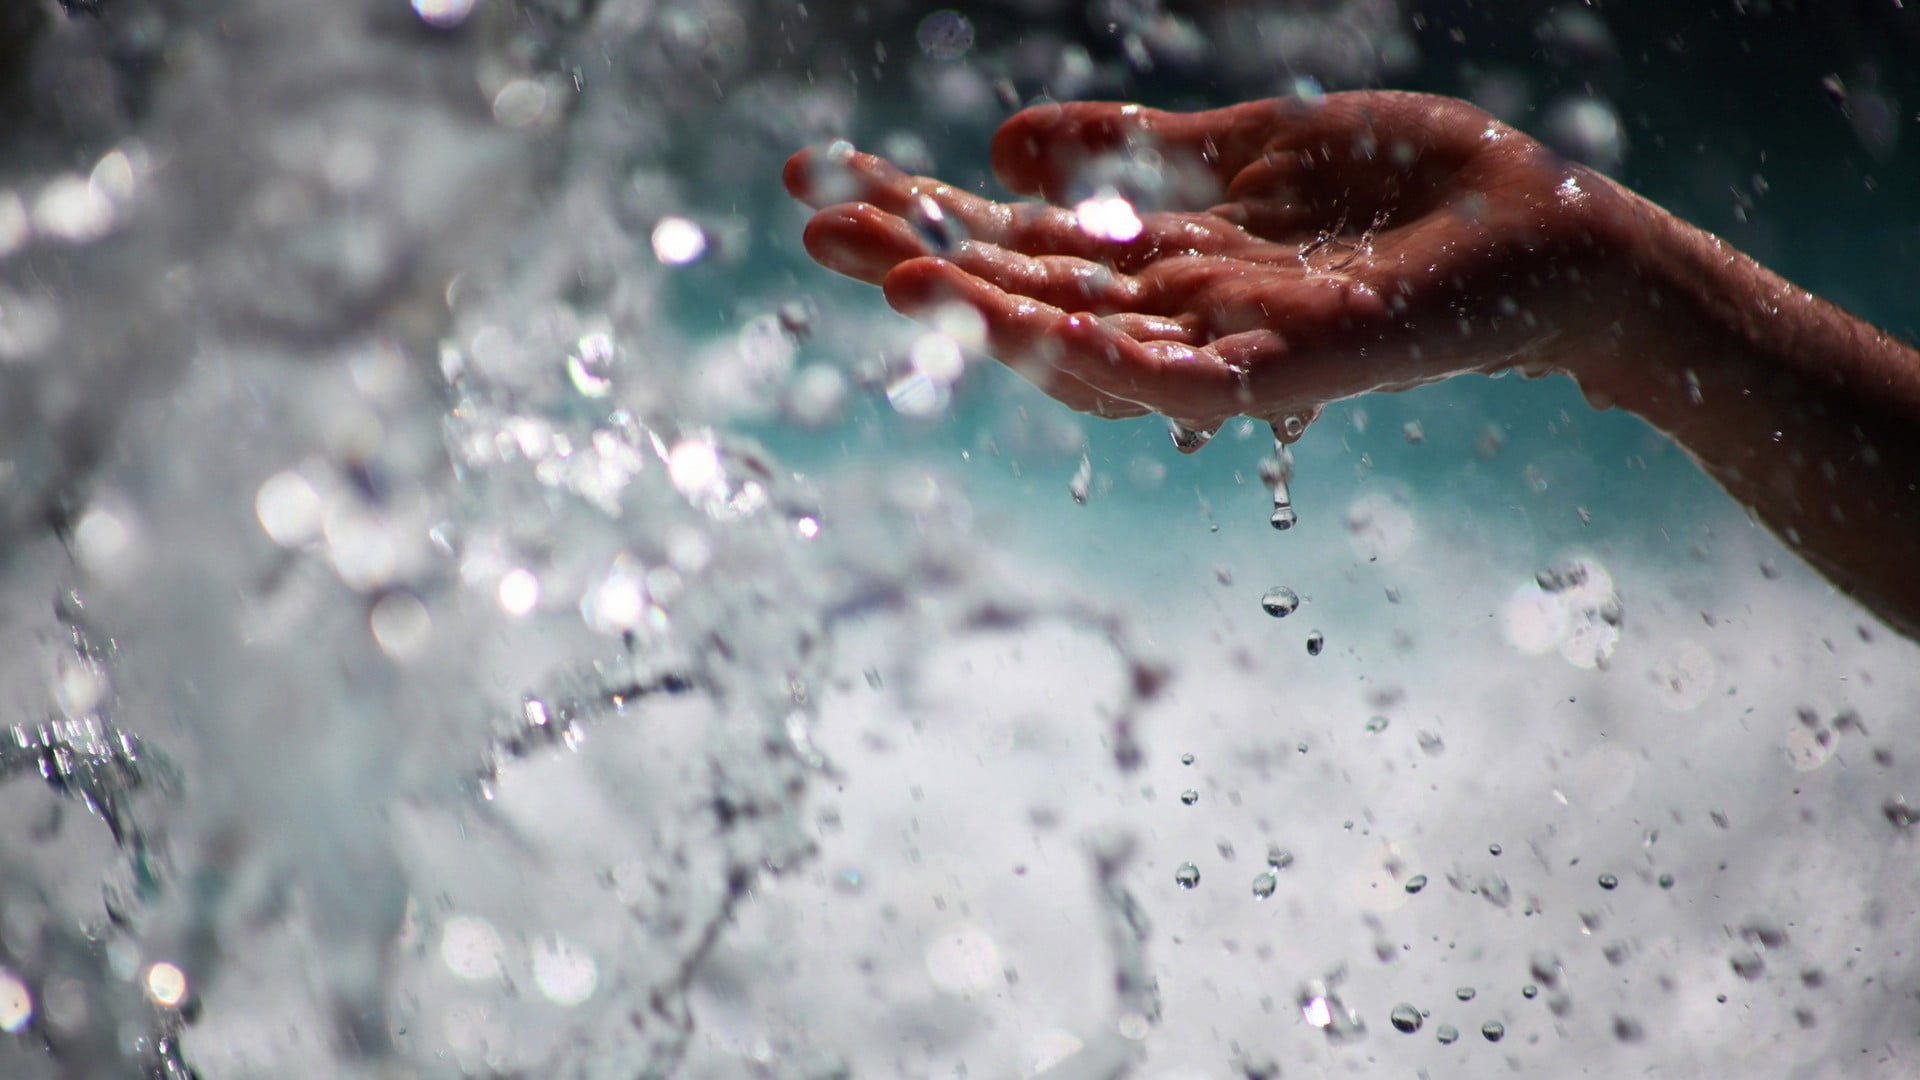 person's left hand, water, hands, water drops, splashes